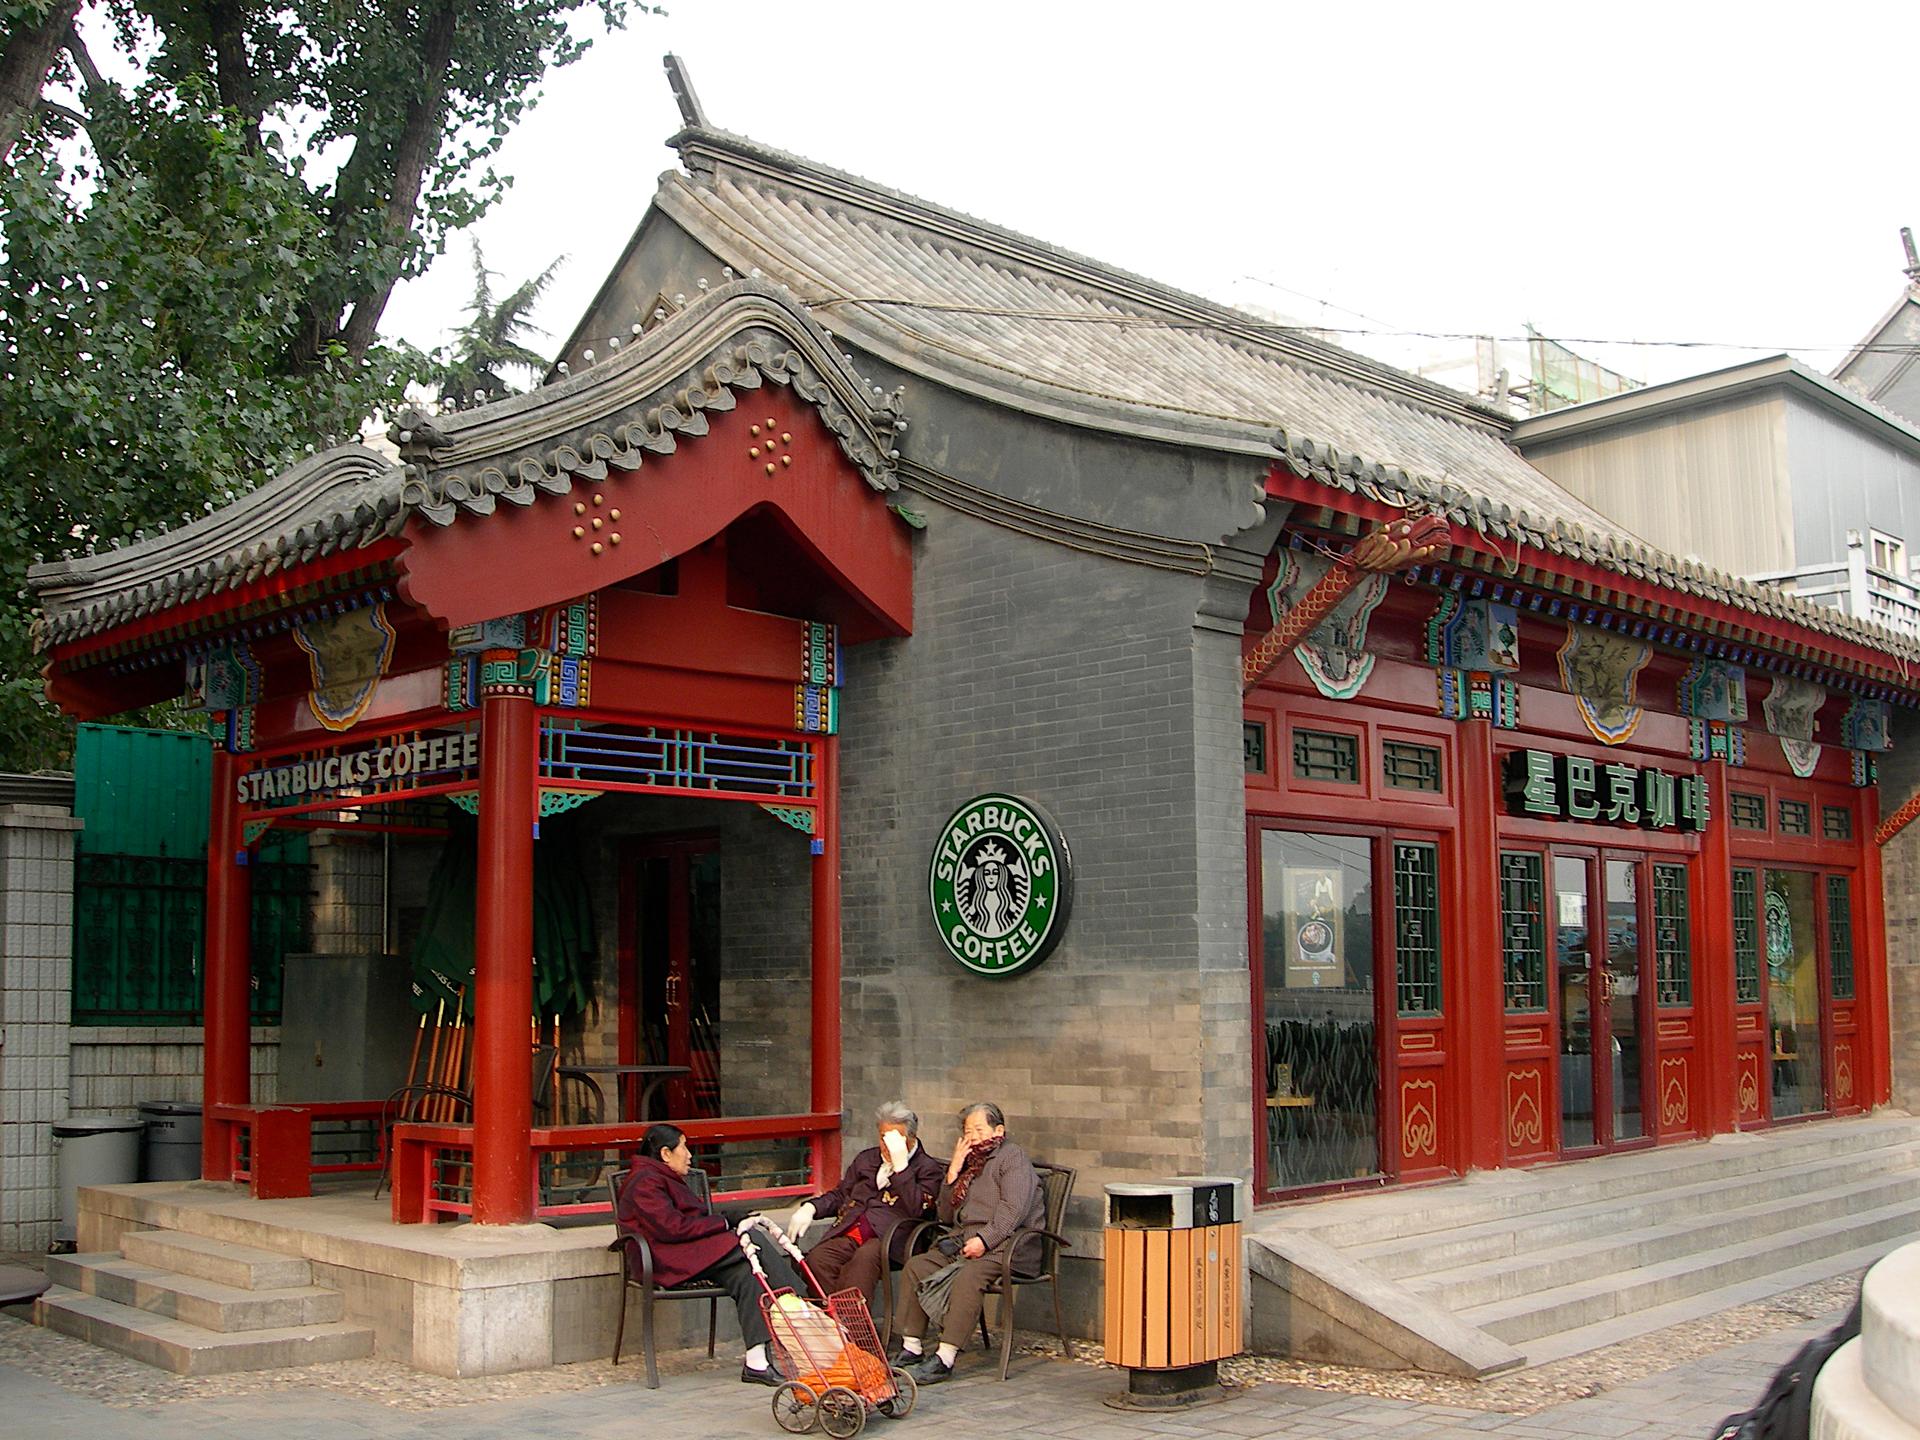 Starbucks in China, like this one in Beijing, discovered recently that a food supplier was sending them expired meat. The scandal hit several fast food restaurants.